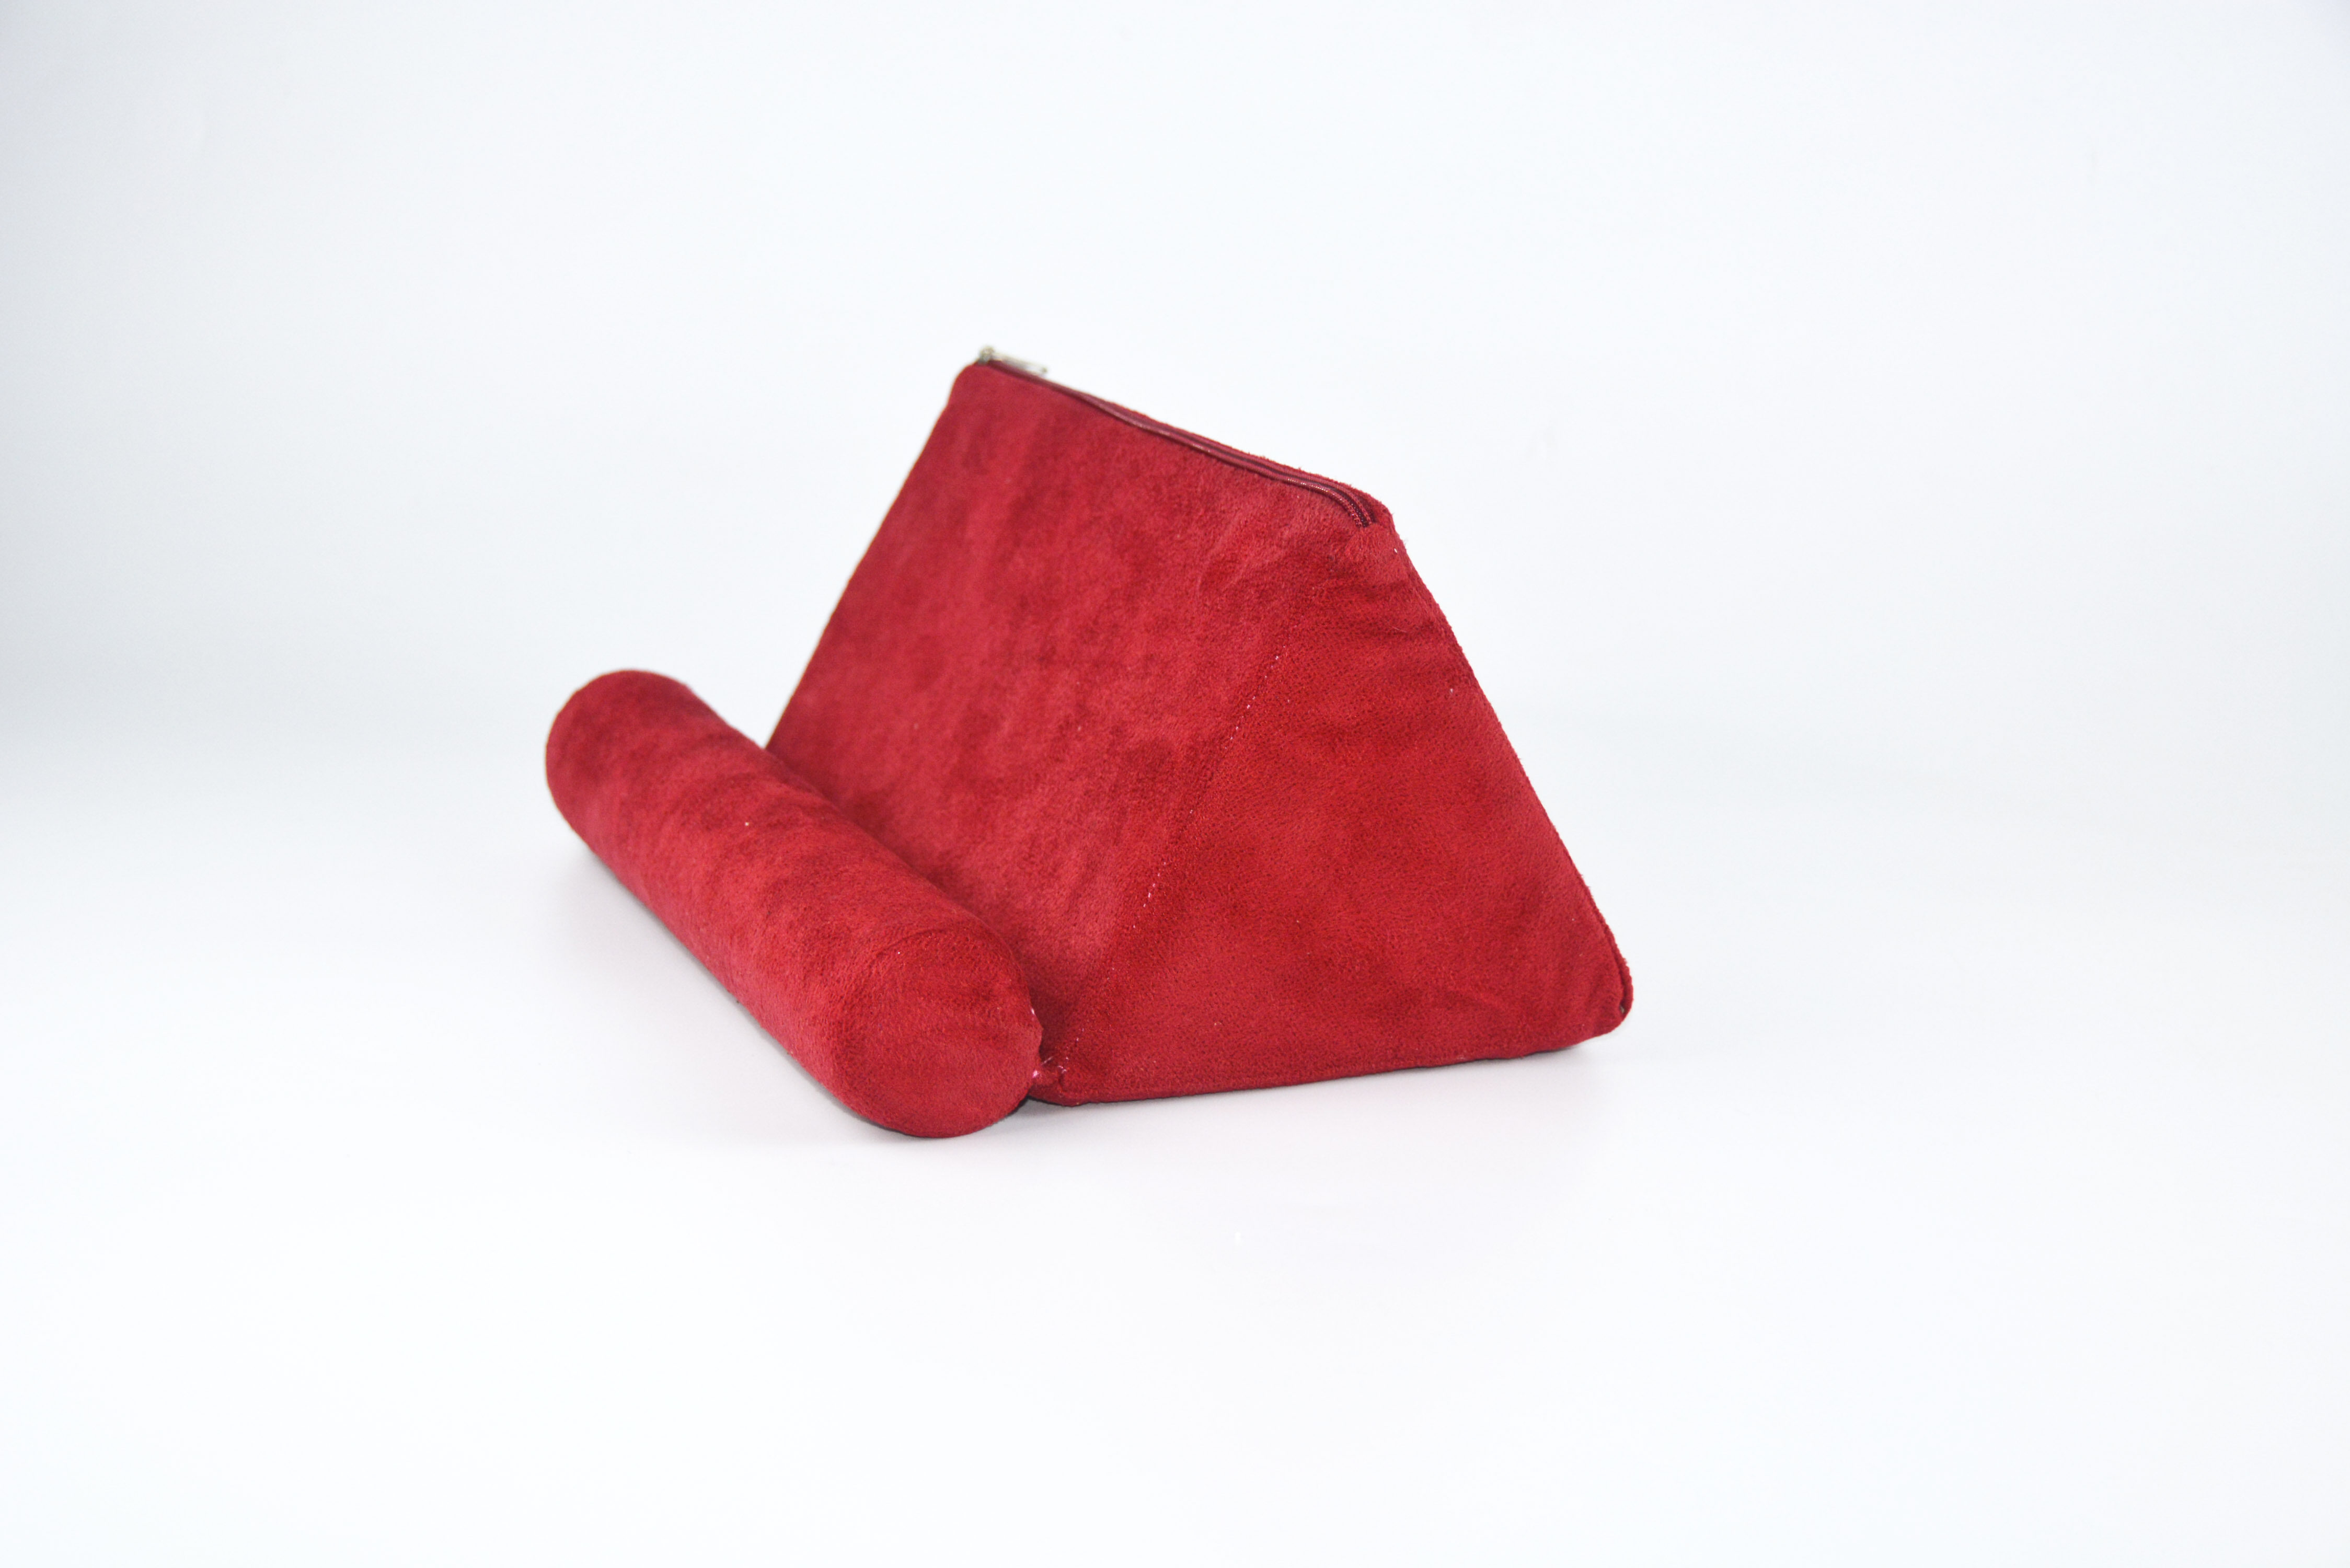 Flannel fabric Ipad cushion with fuctional of protecting the pad from scratches or friction-copy